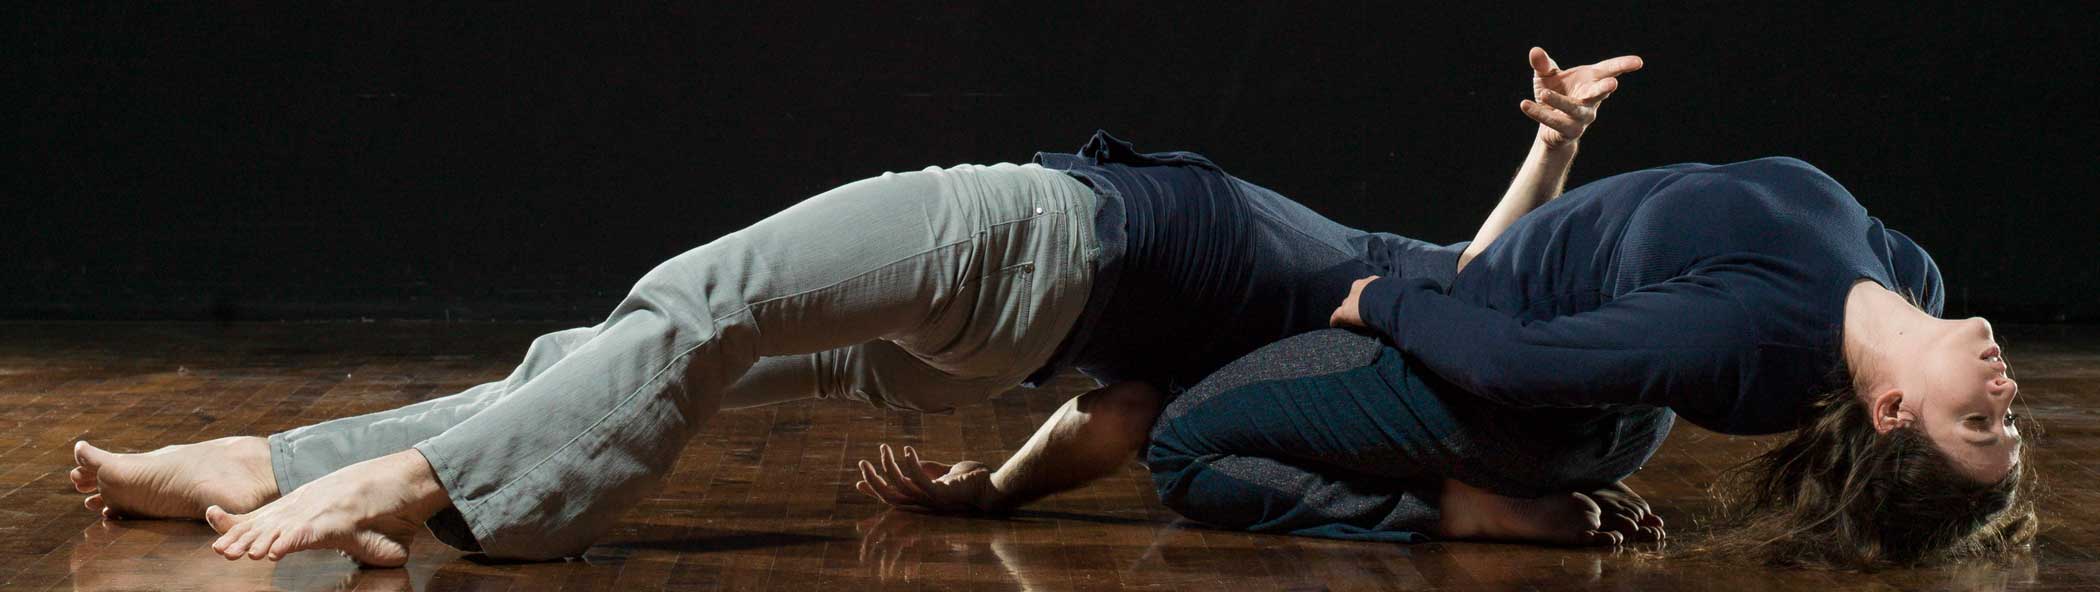 Dancers, Julia Antonick and Jonathan Meyer, perform on a floor both in arched back positions. Julia sits on her knees with her head and torso tossed back to the floor, while Jonathan, suspends part of his weight across Julia’s lap and arches the rest of his body off the ground, resting the rest of his weight only on his head and his heels. Both wear navy blue shirts and gray-toned pants.